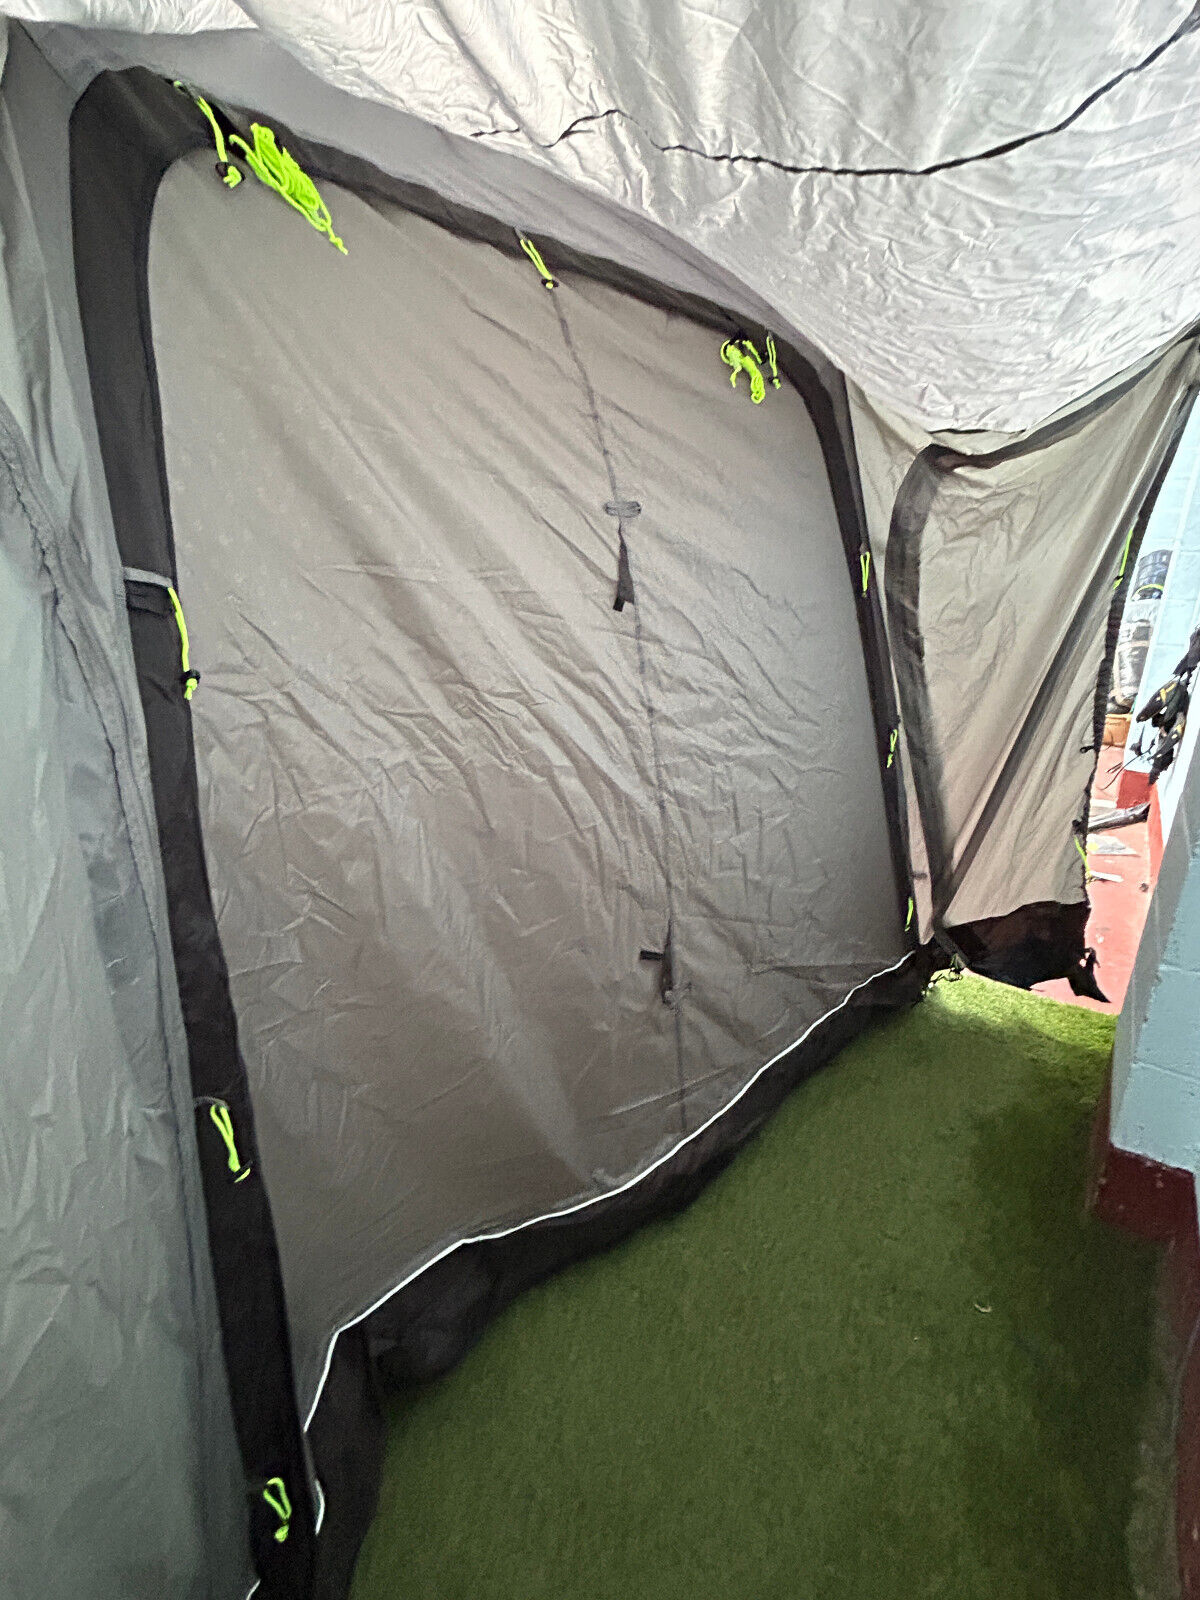 Outwell Starville SA Inflatable Drive Away Awning LOW